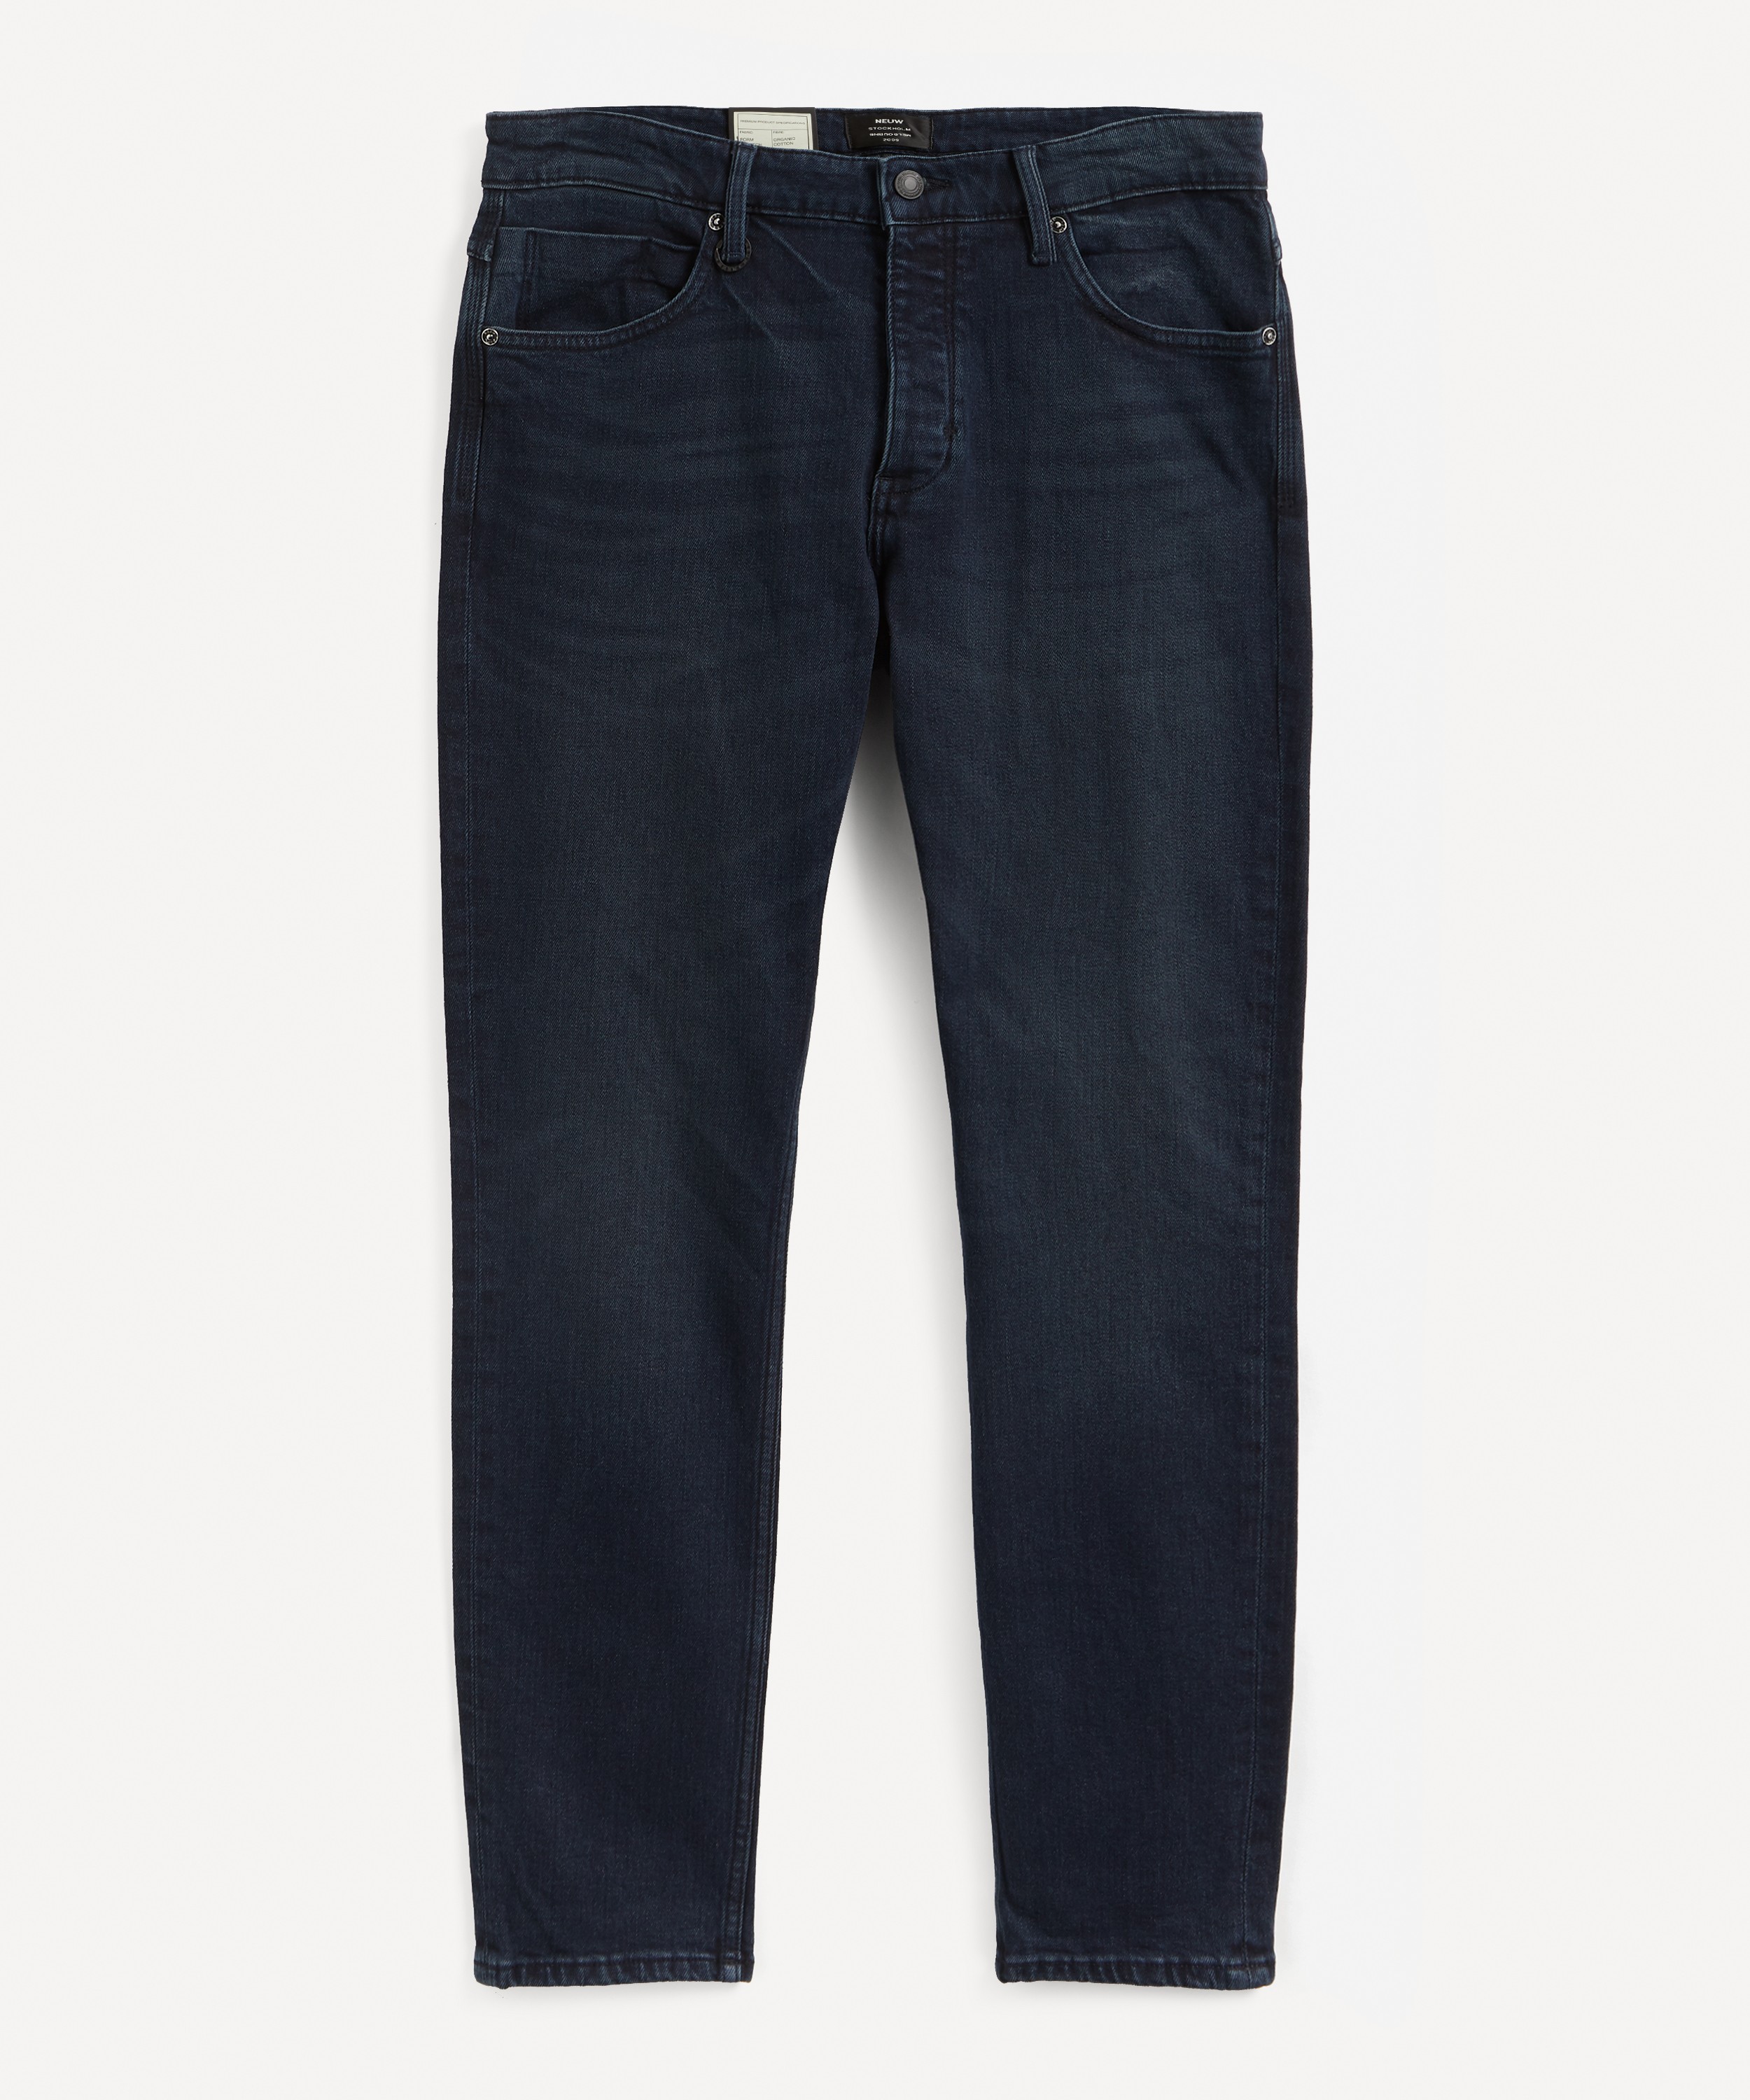 Neuw - Lou Slim Silent Water Jeans image number 0